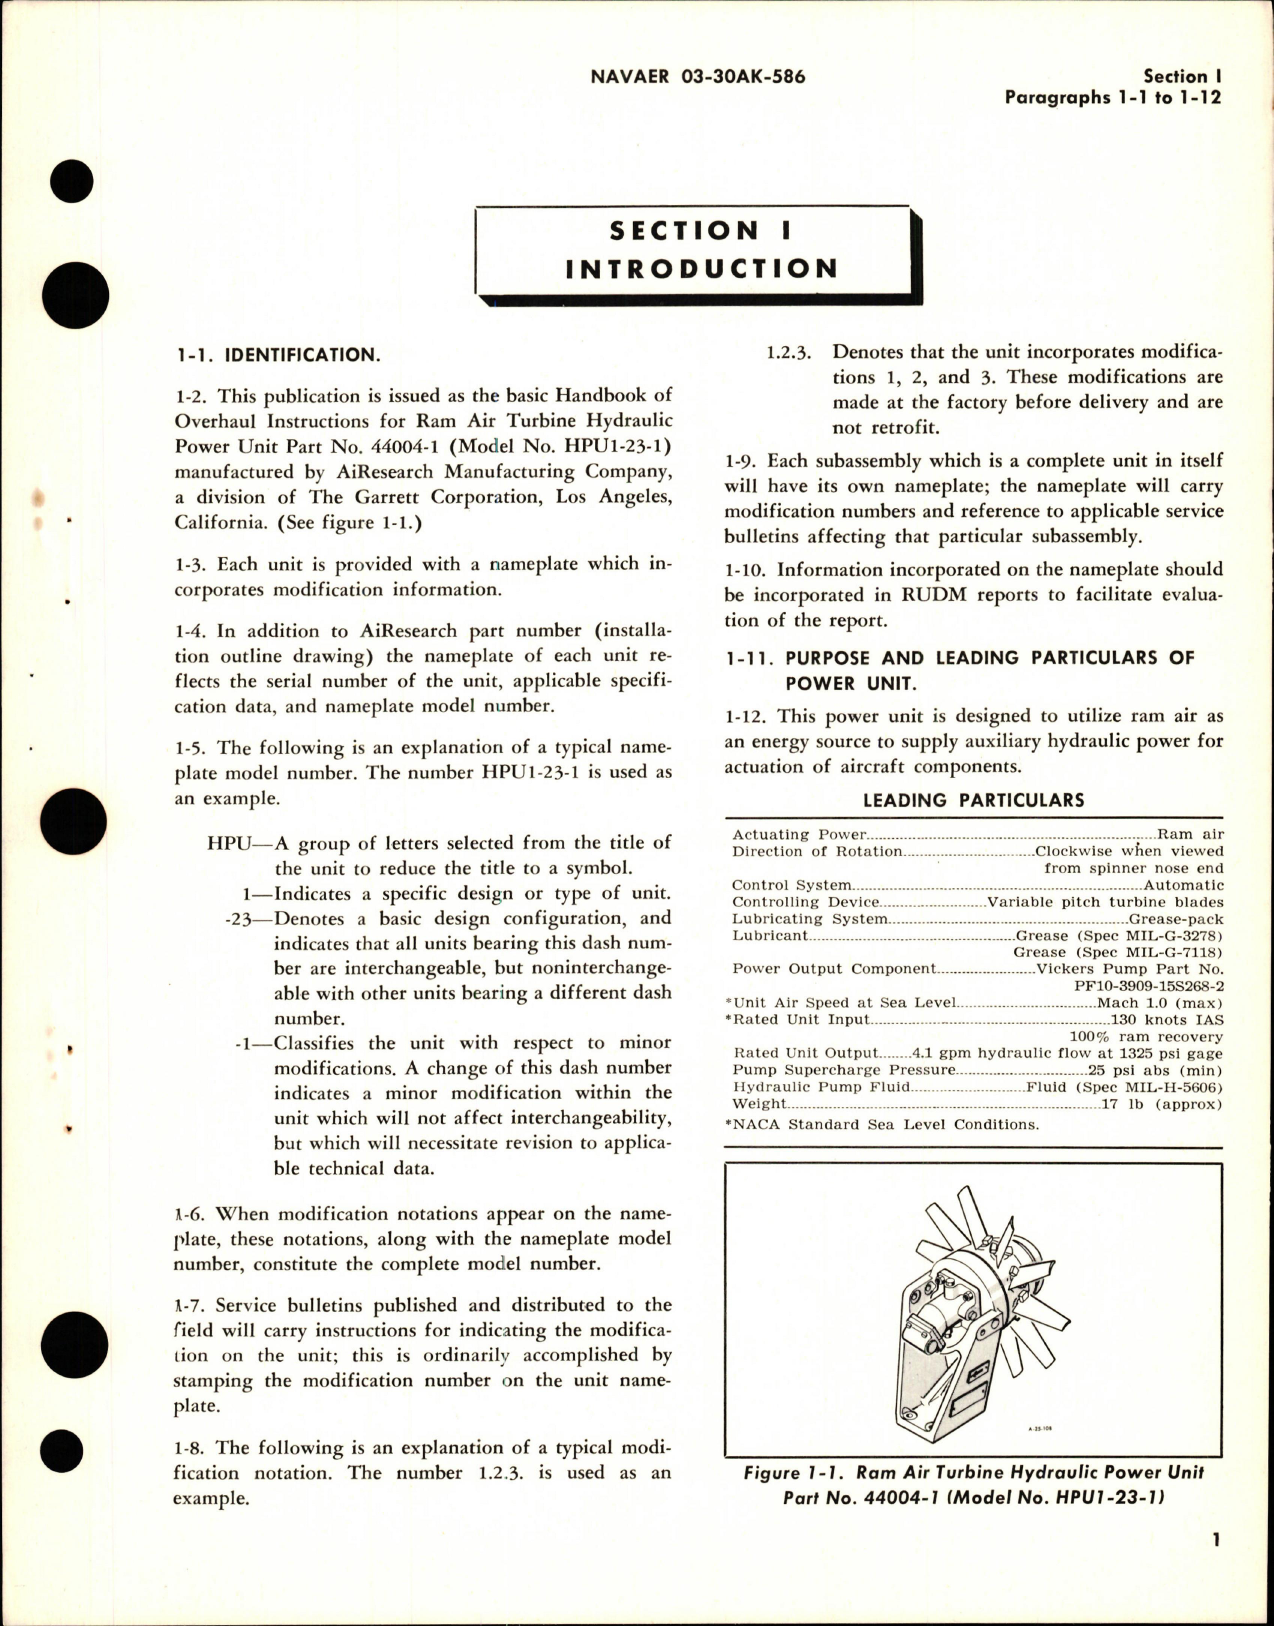 Sample page 5 from AirCorps Library document: Overhaul Instructions for Ram Air Turbine Hydraulic Power Units - Parts 44004-1, 44084, 44084-1, and 44140 